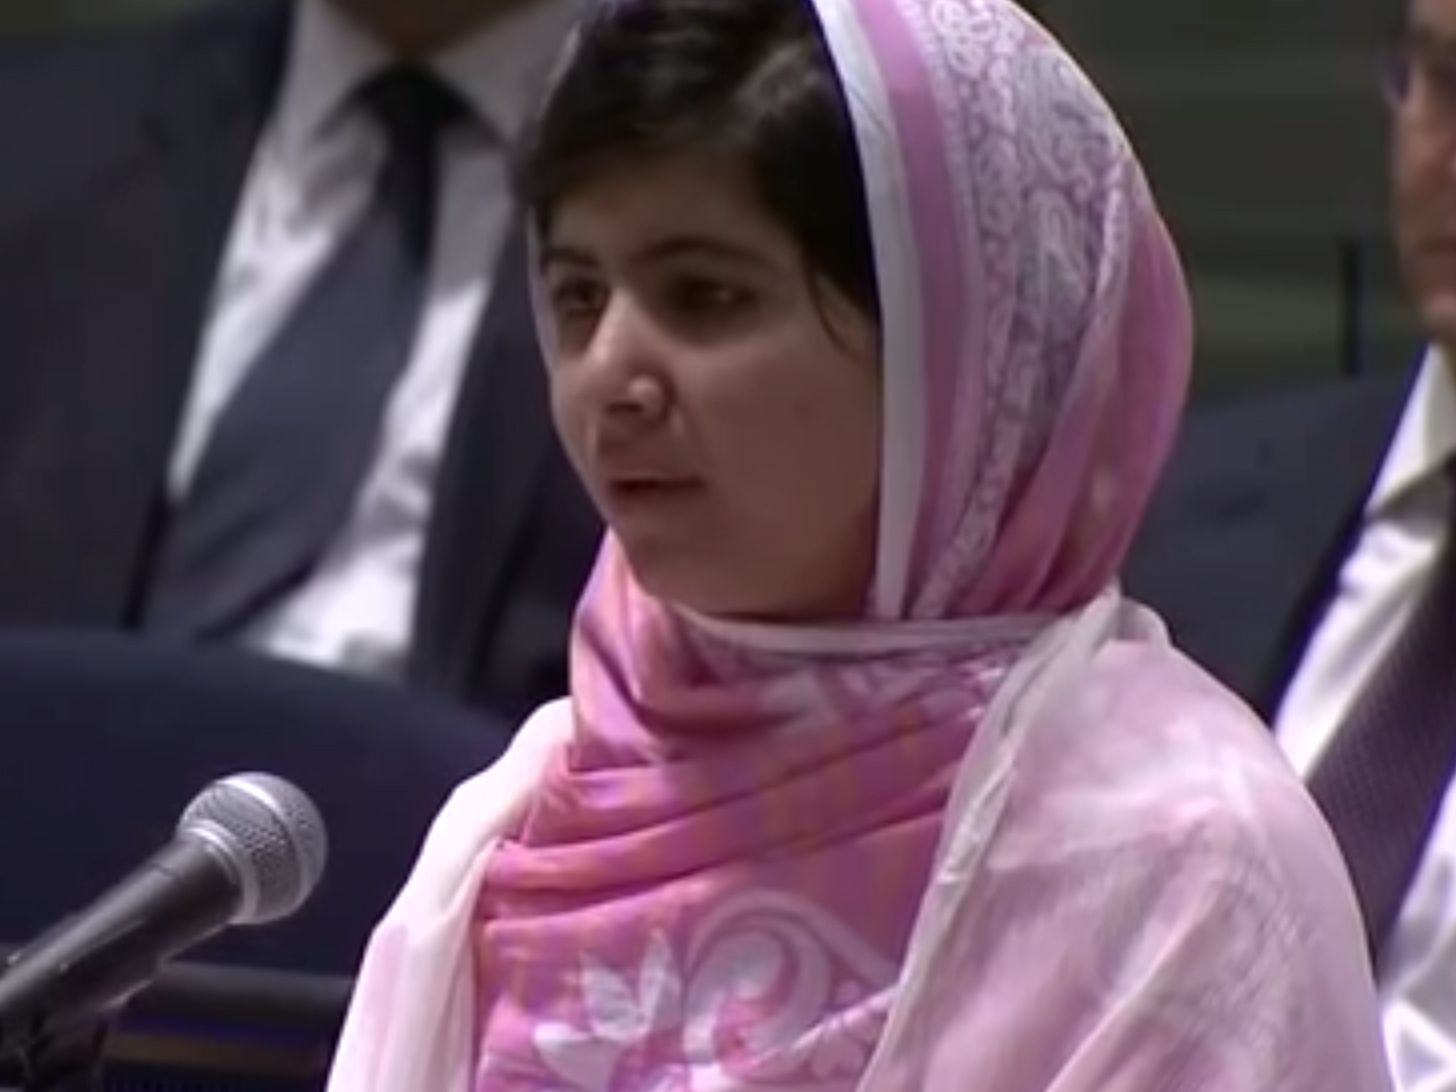 what is the thesis of malala's speech